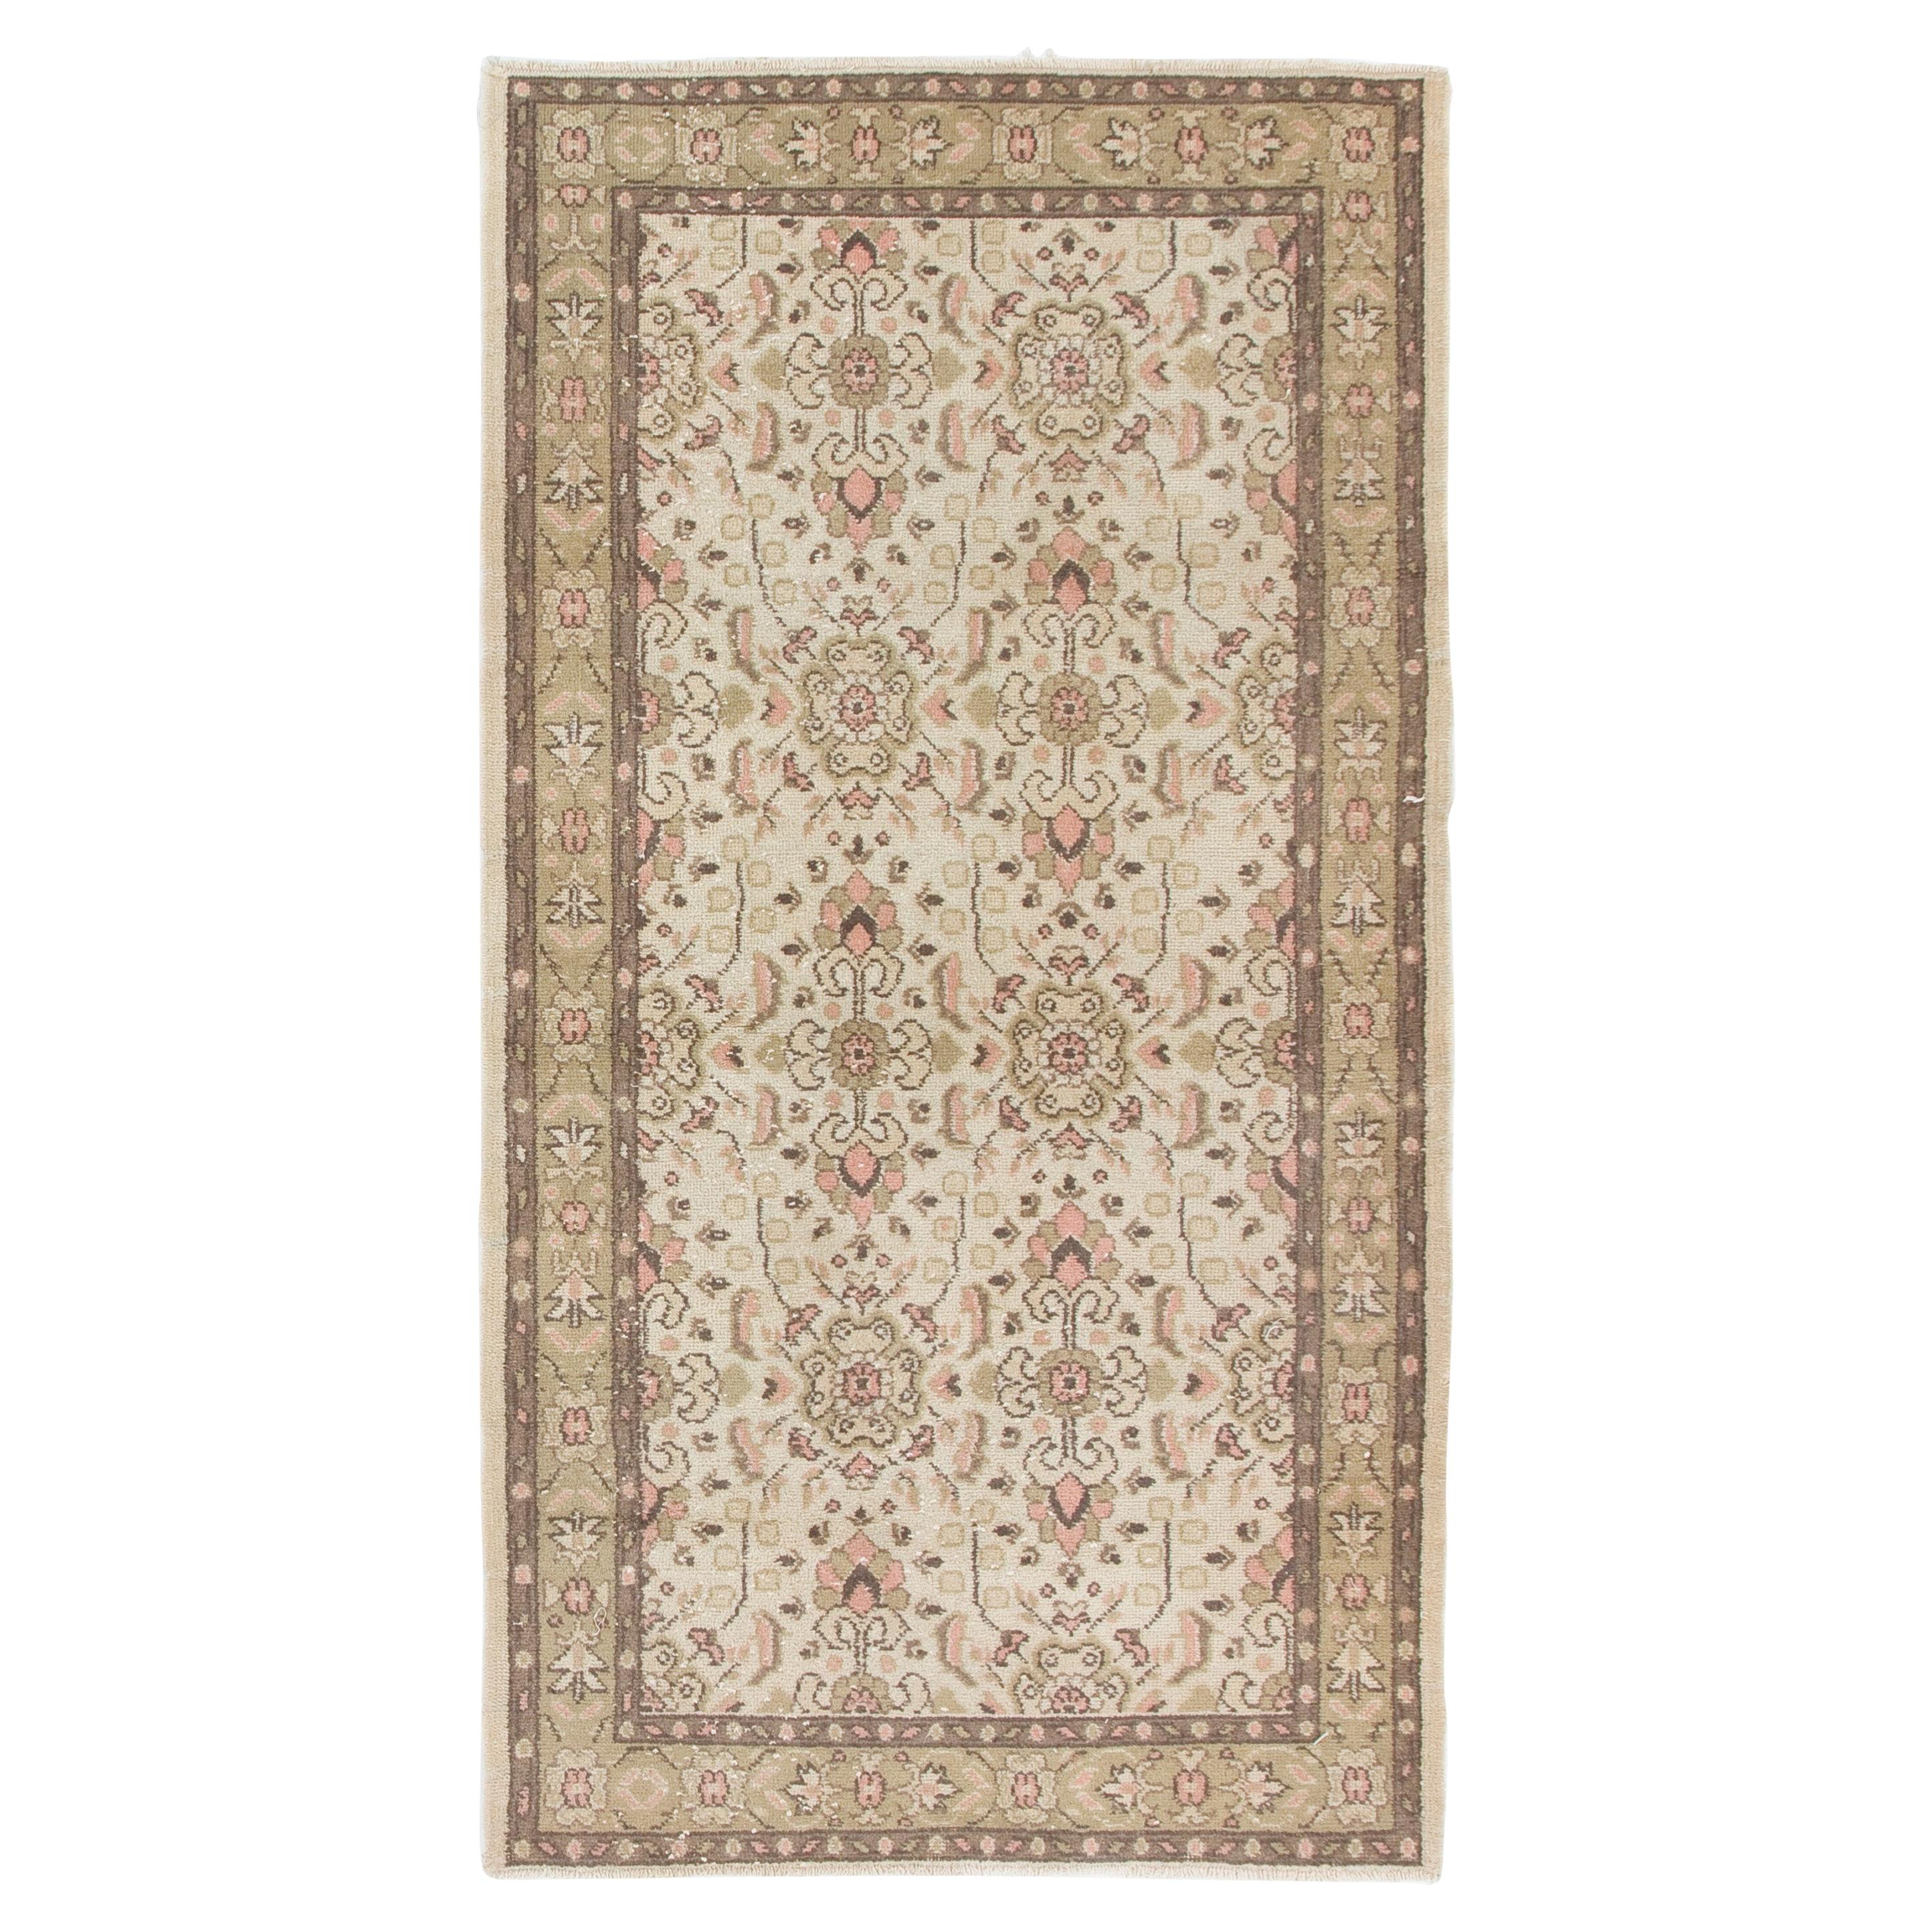 3.7x6.8 Ft Vintage Anatolian Wool Rug in Beige, Faded Green, Soft Pink and Brown For Sale